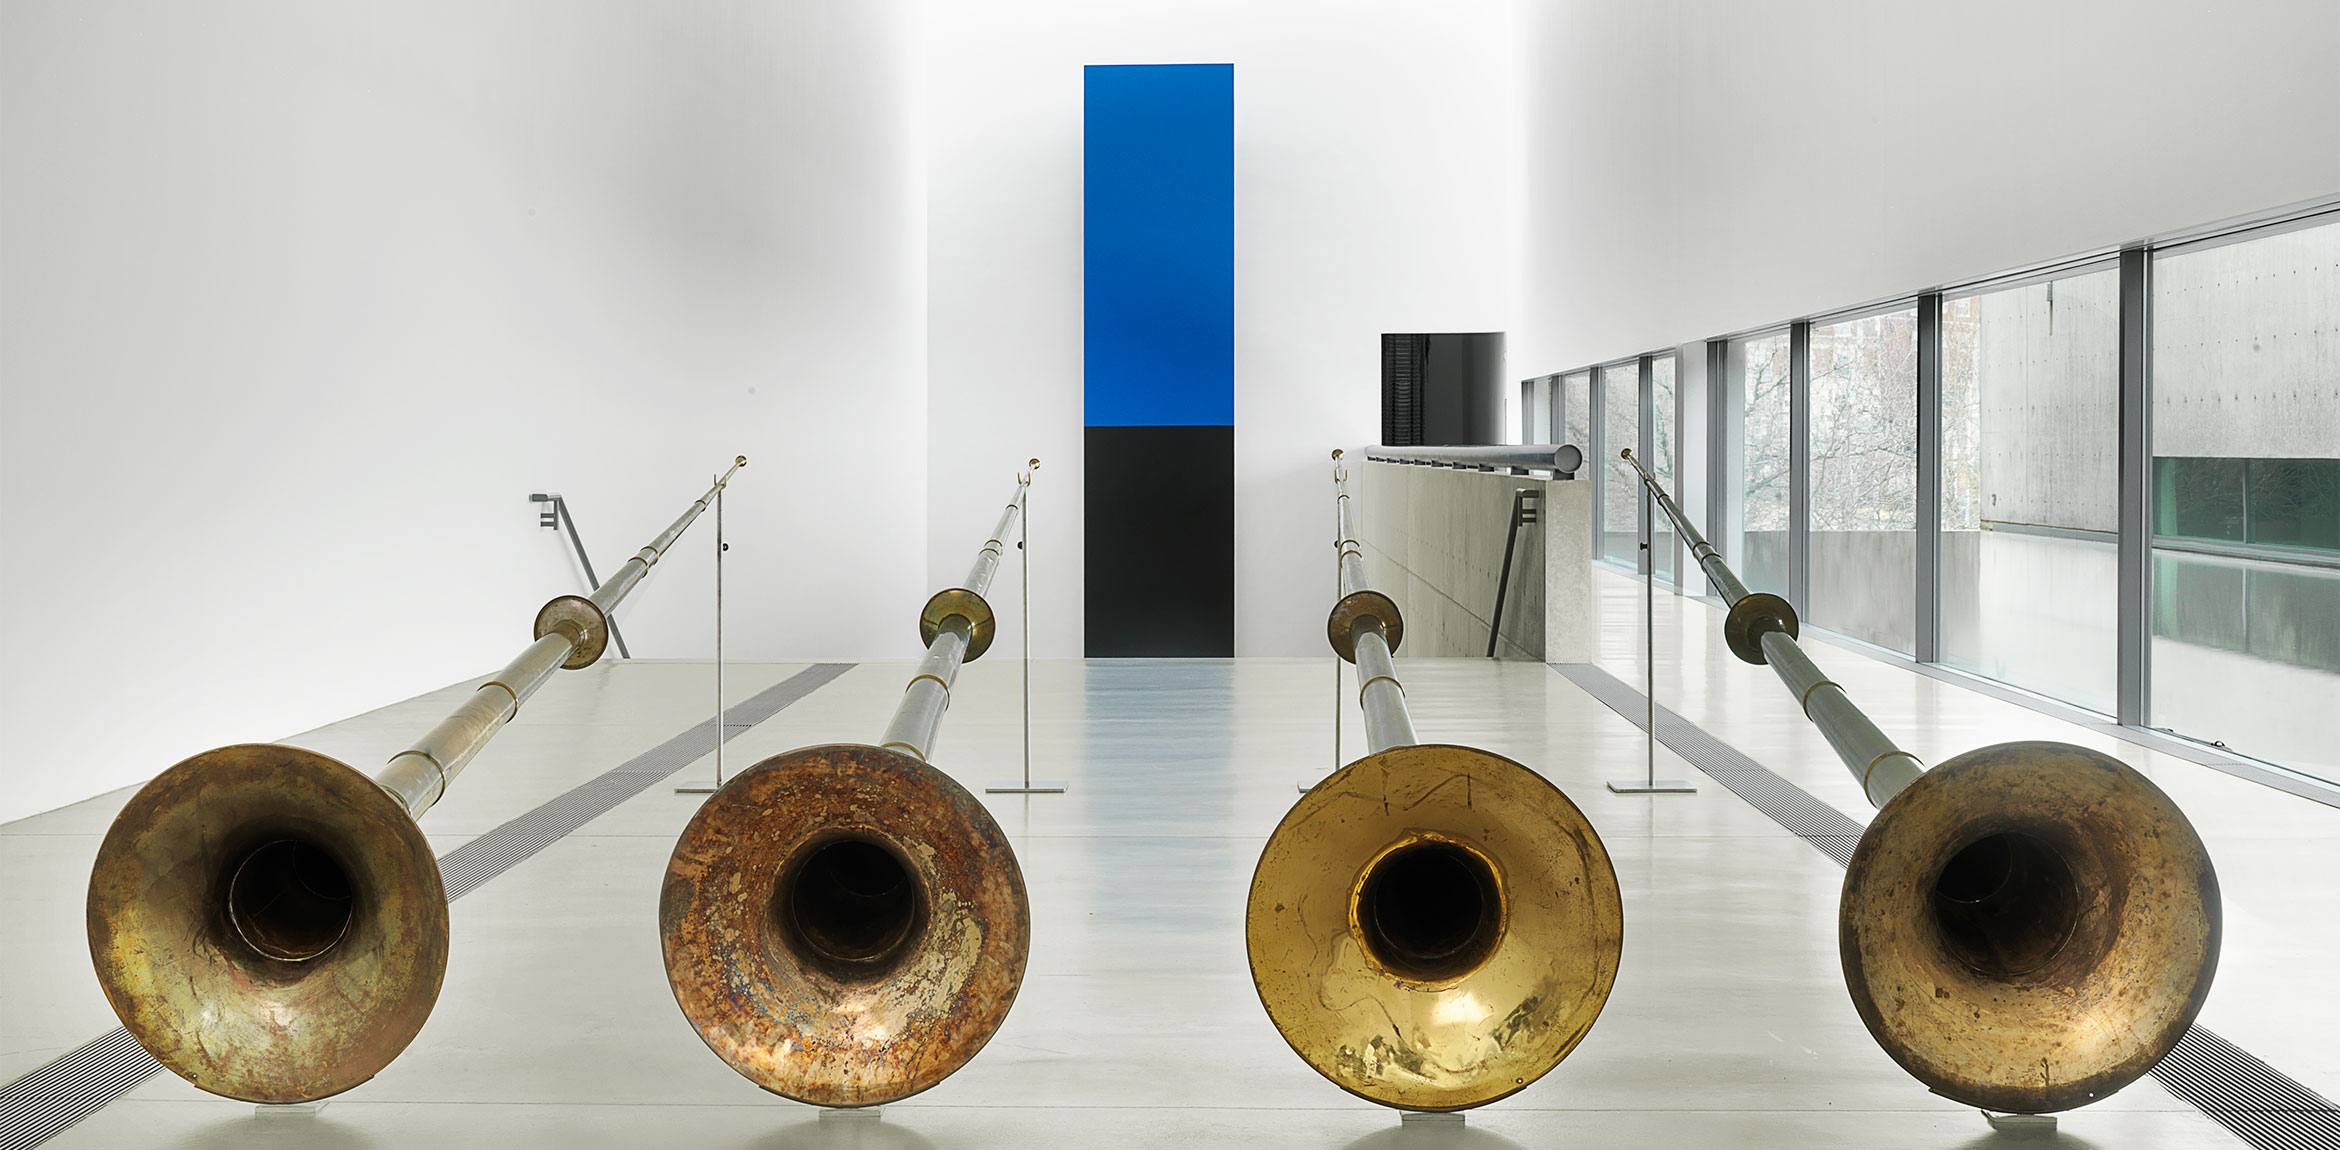 Terry Adkins' "Last Trumpet" in the Main Gallery, four 18-foot akrhaphones designed by the artist.